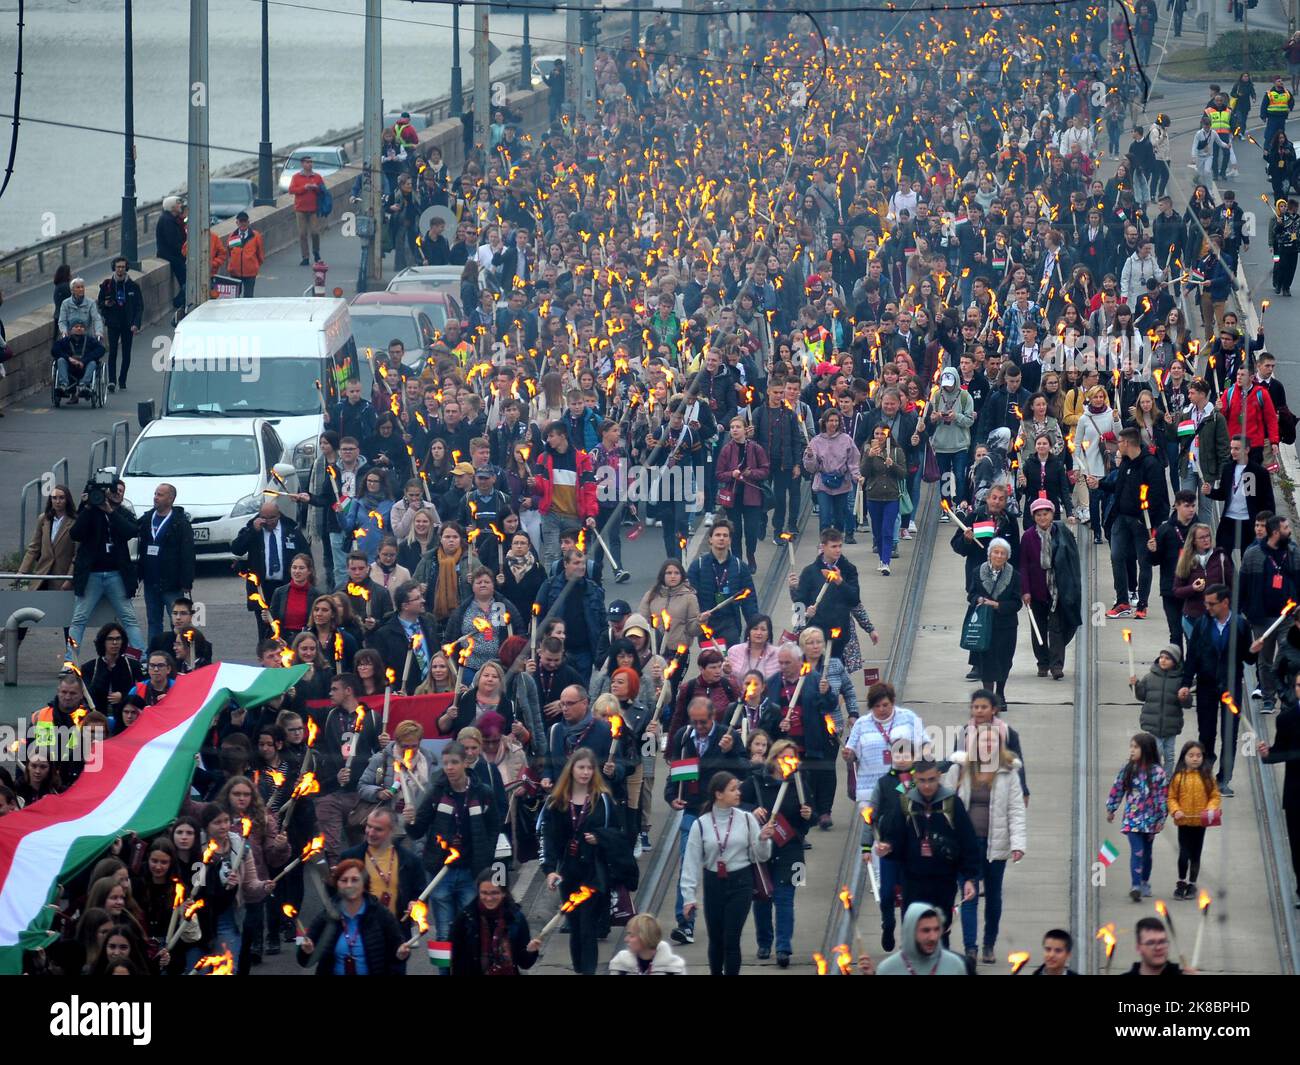 Budapest, Hungary. 22nd Oct, 2022. Touch-light procession in memorial of the 1956 revolution before the memorial day, Budapest, Hungary, 22th Oct 2022, Balint Szentgallay / Alamy Live News Credit: Bálint Szentgallay/Alamy Live News Stock Photo